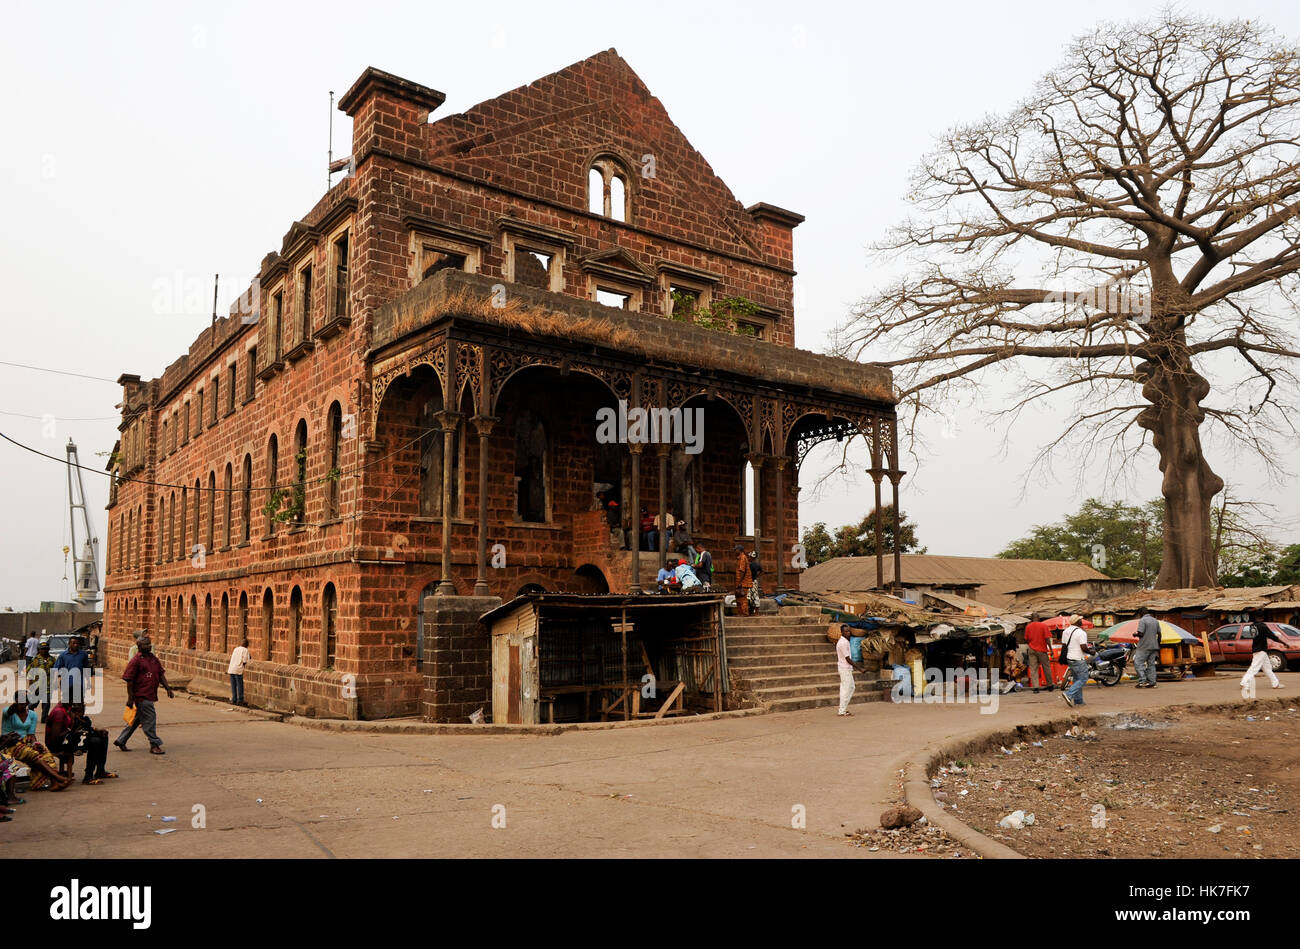 SIERRA LEONE, Freetown, old colonial building customs house at port Stock Photo